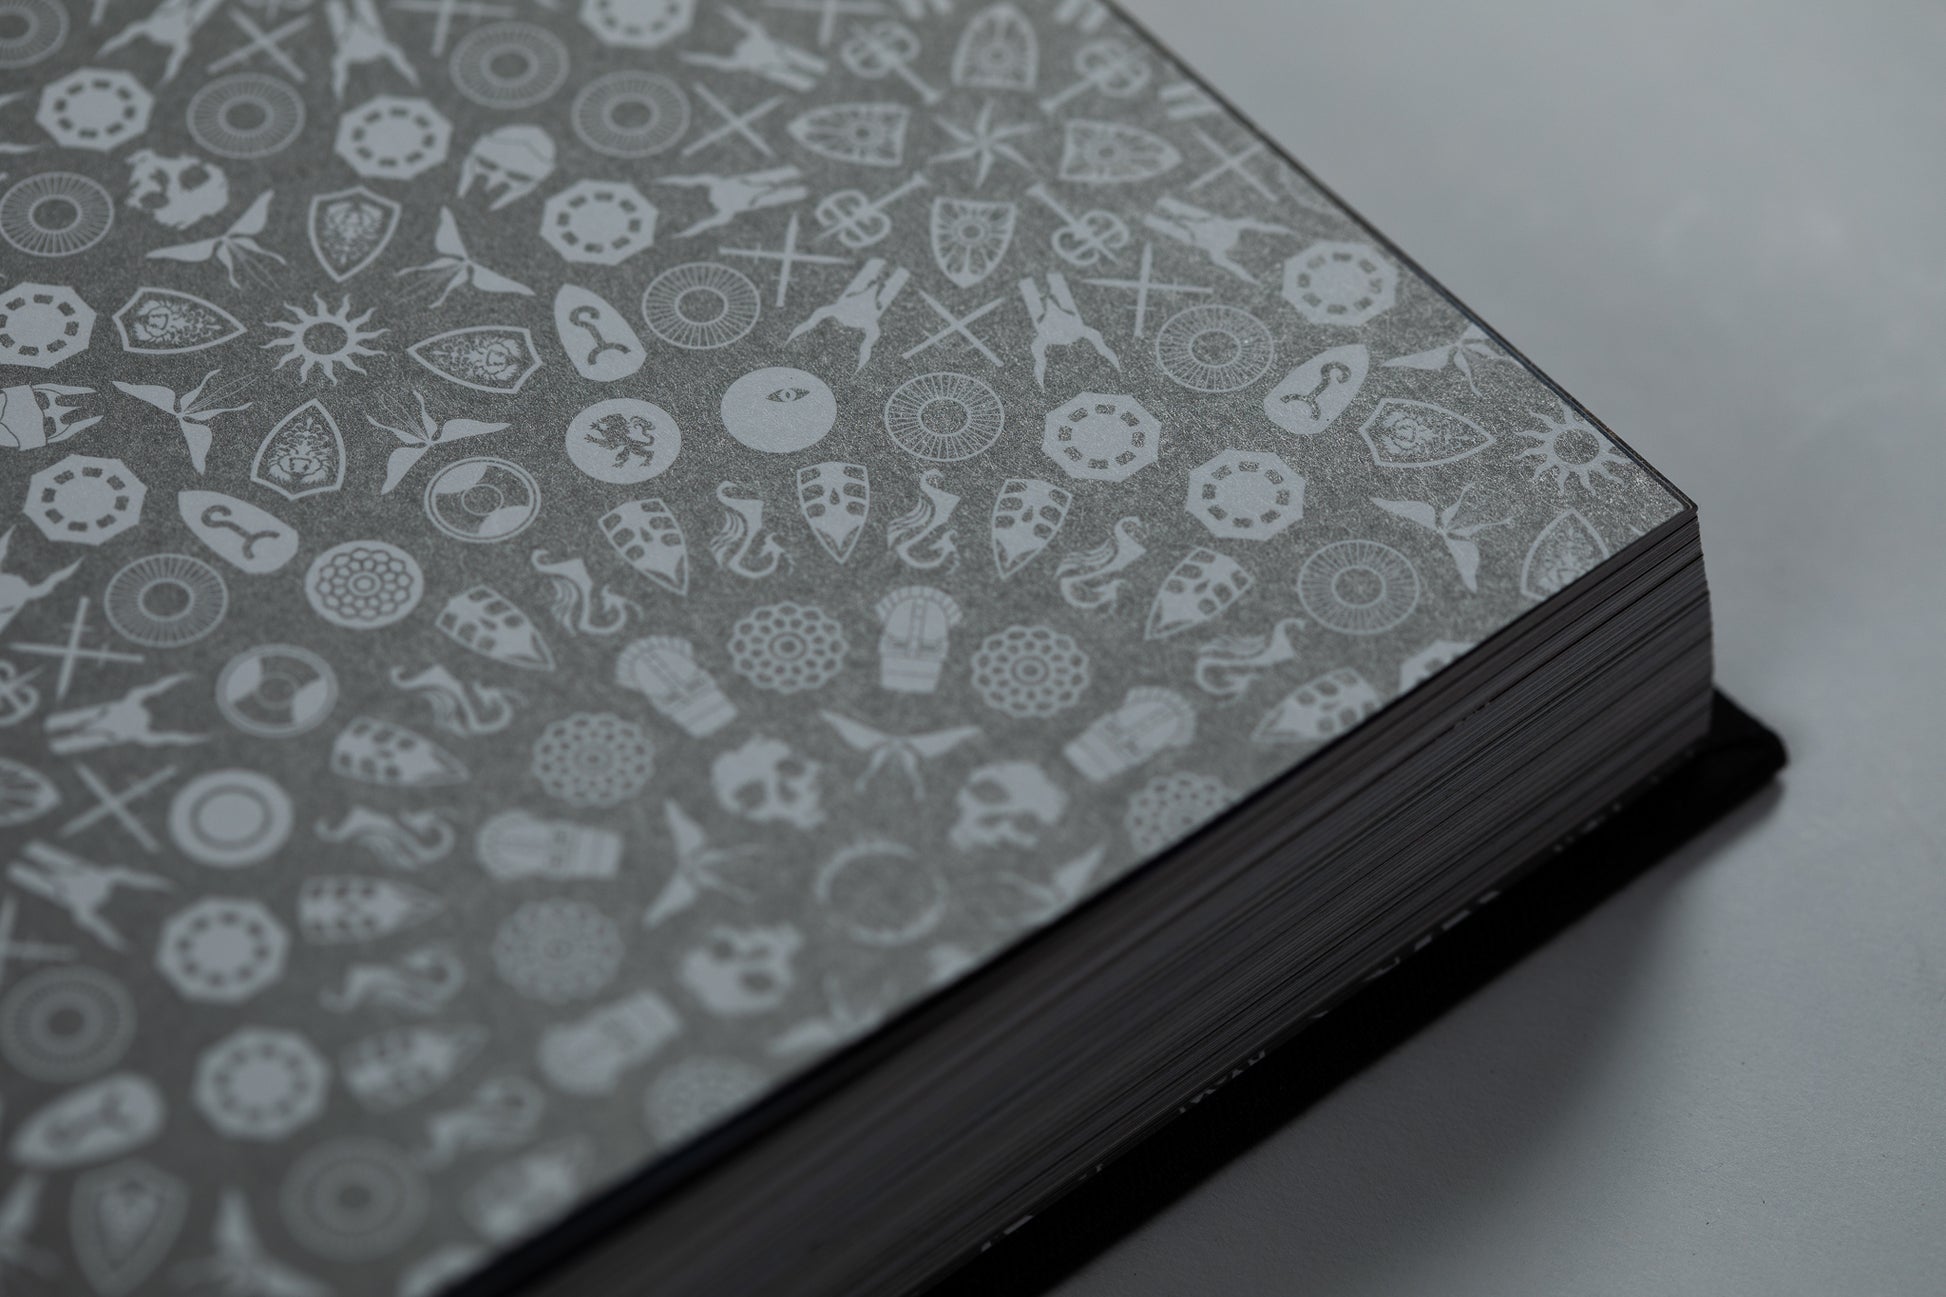 The Black Book of Cards Limited Edition